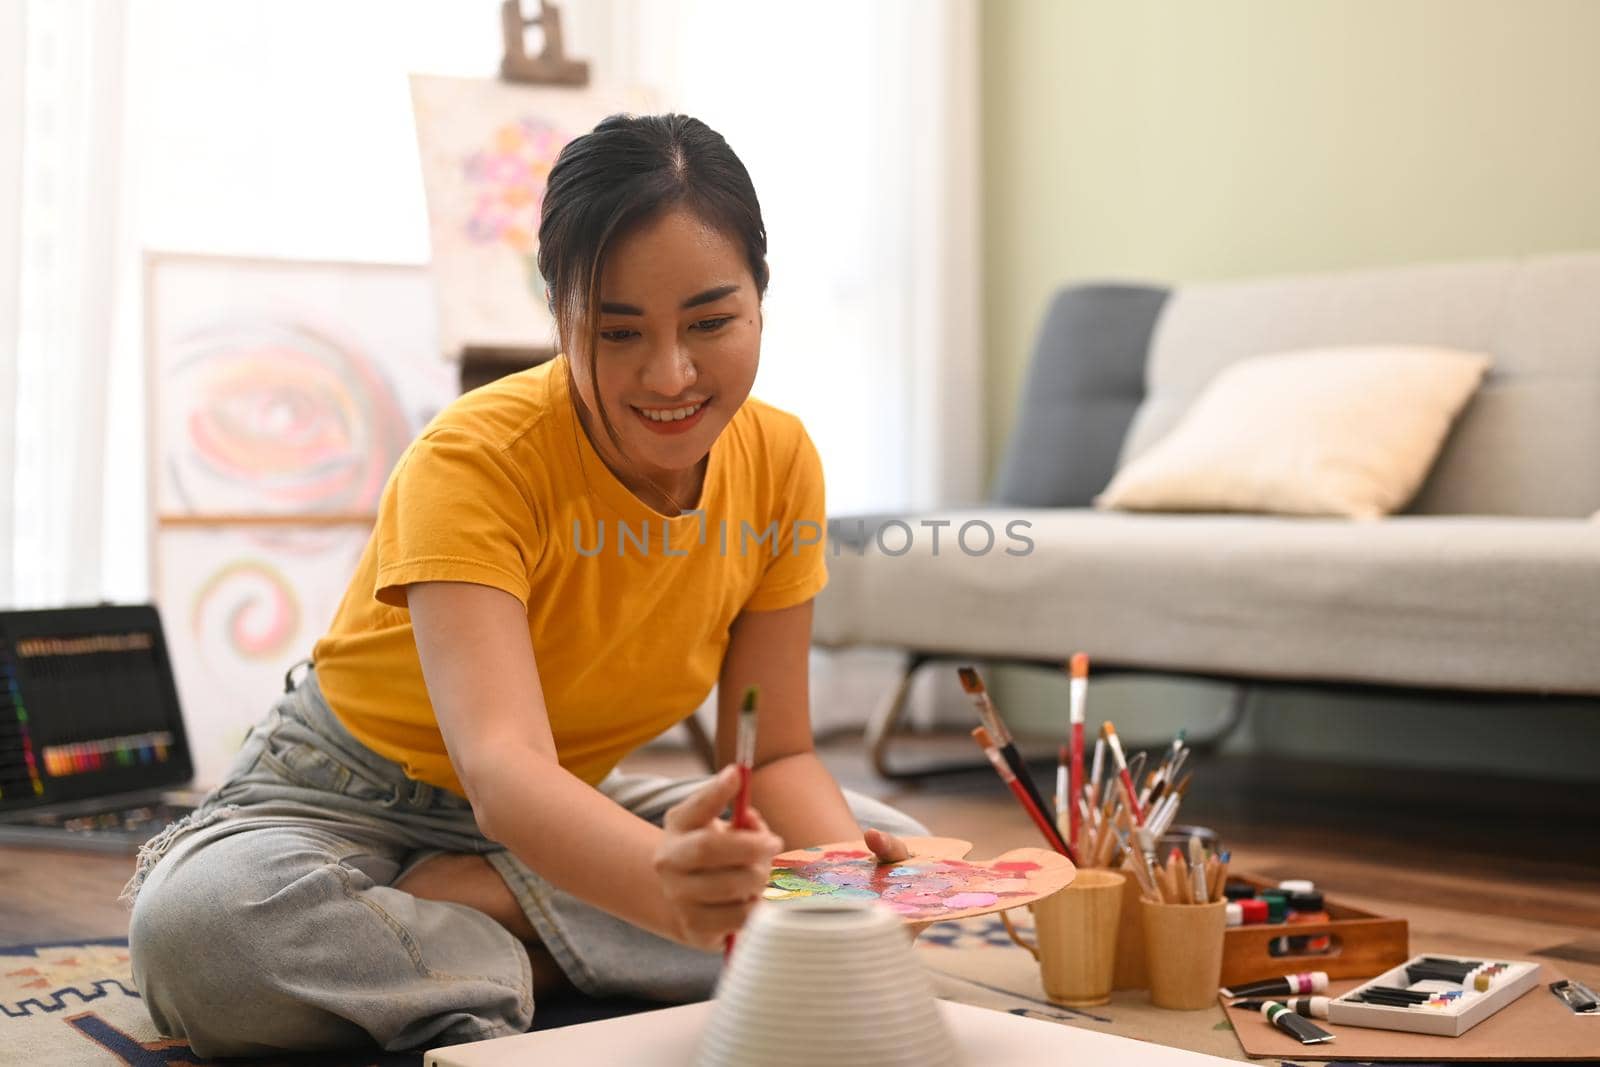 Happy woman painting picture on canvas with oil paints in bright living room. Leisure activity, creative hobby and art concept.